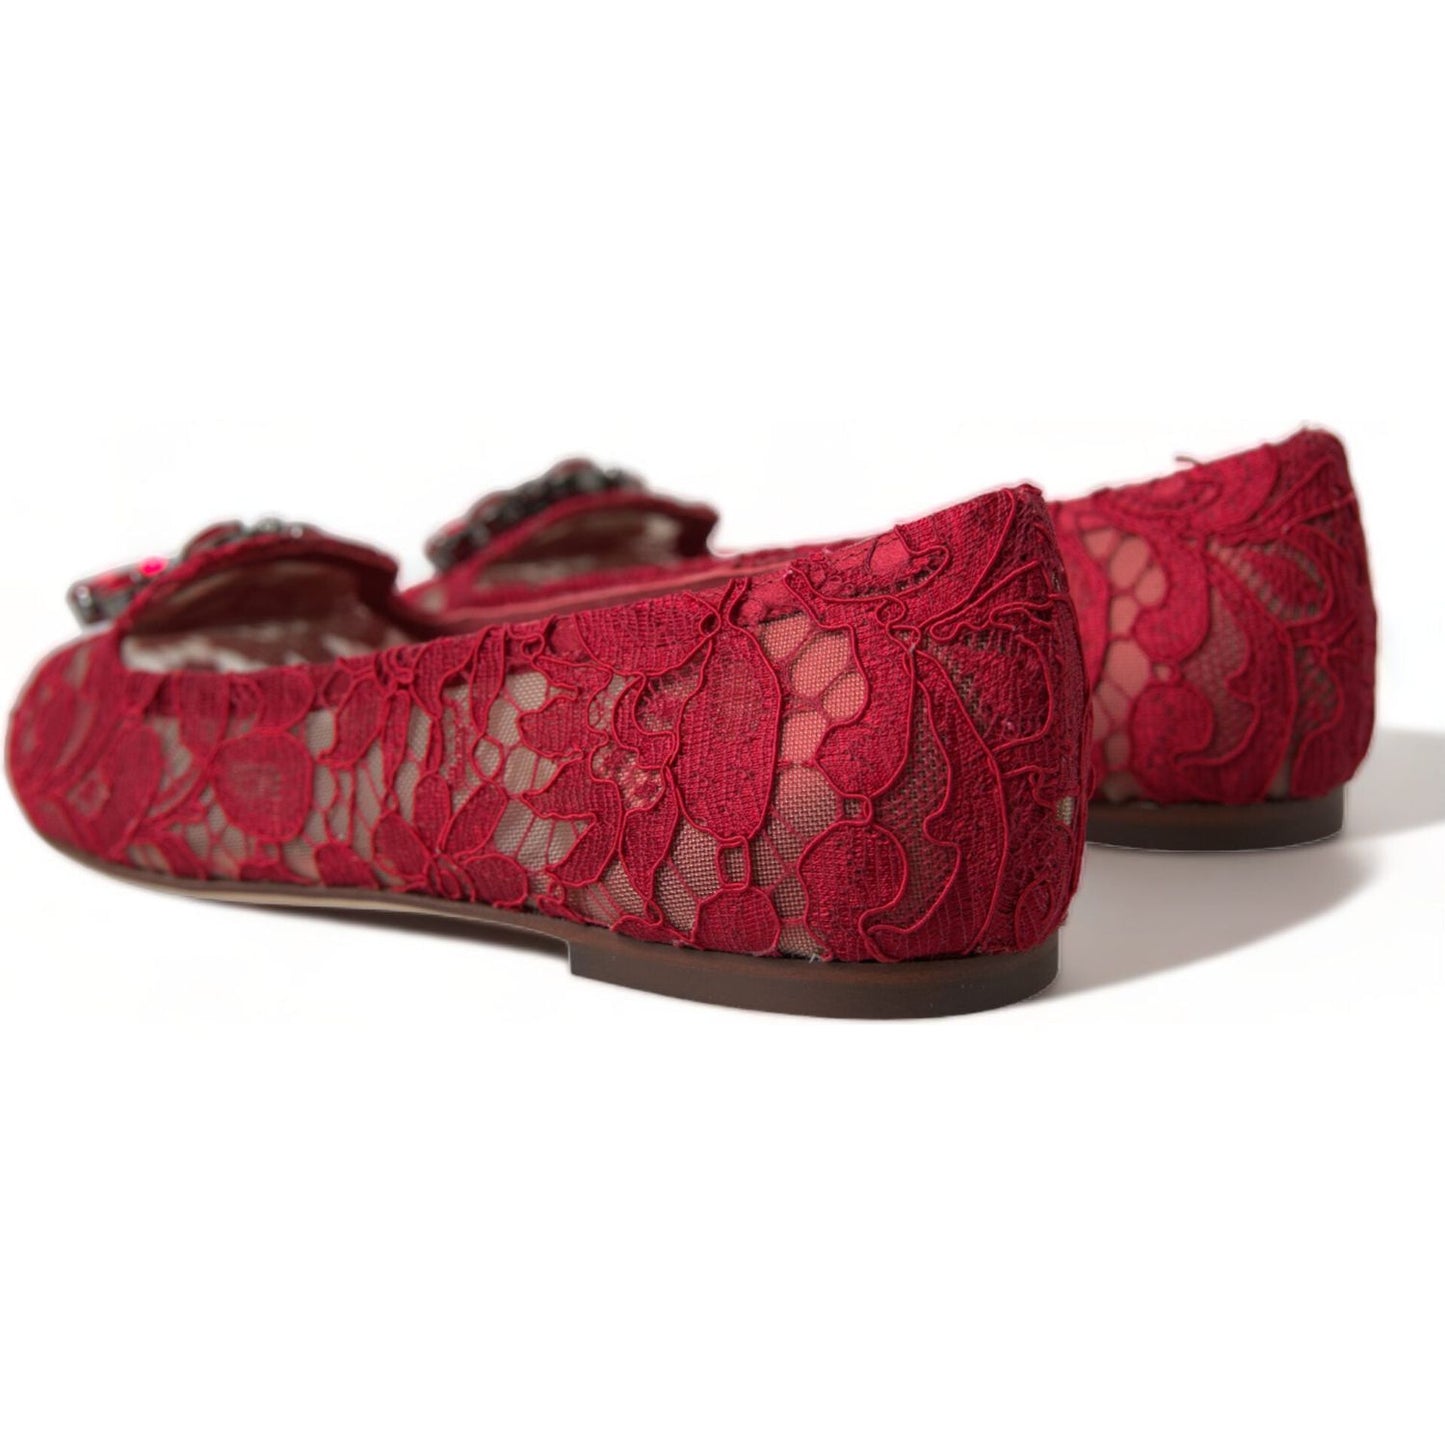 Dolce & Gabbana Elegant Floral Lace Vally Flats red-vally-taormina-lace-crystals-flats-shoes 465A9054-bg-scaled-fb6c4d80-cc9.jpg